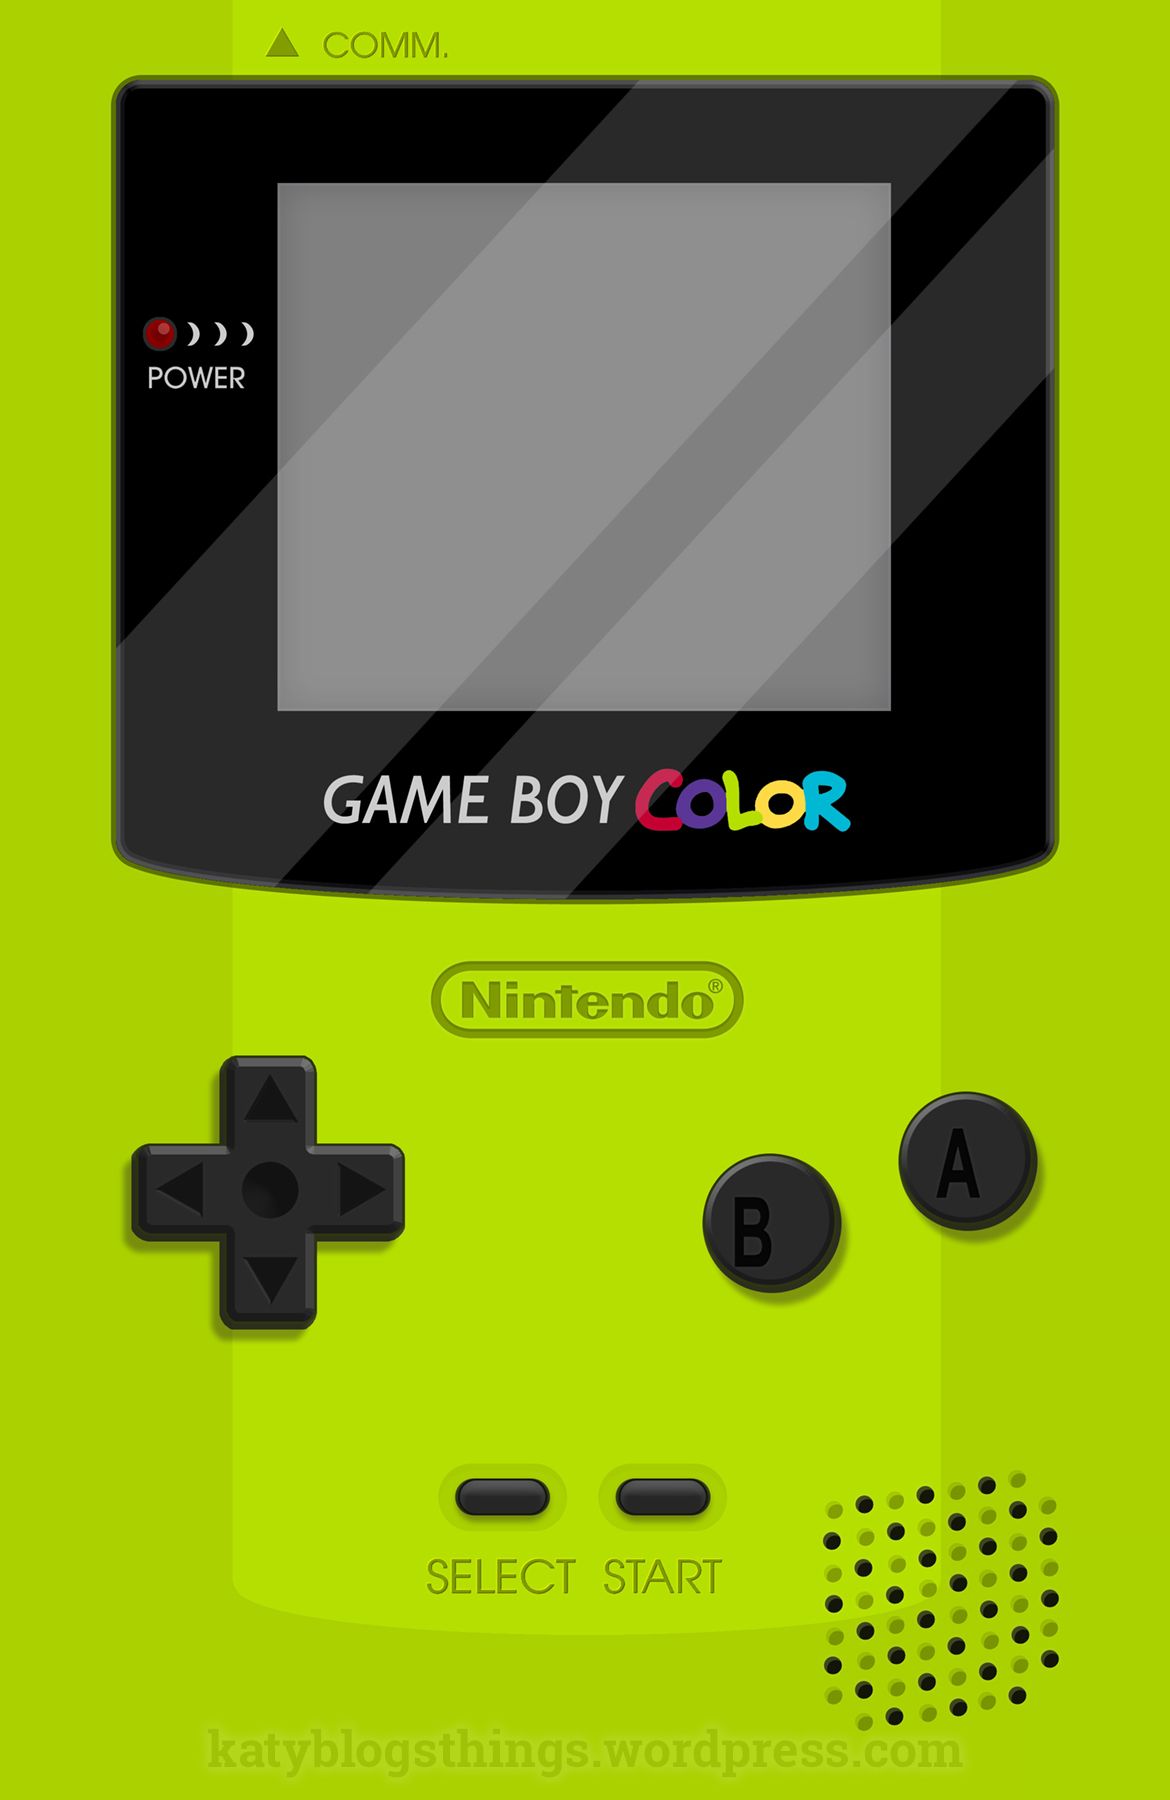 Green Gameboy Color by Katy Dickey. Part of the Gameboy Series. See more art on my blog at katyblogsthing. Gameboy, Minecraft banner designs, Yellow iphone case